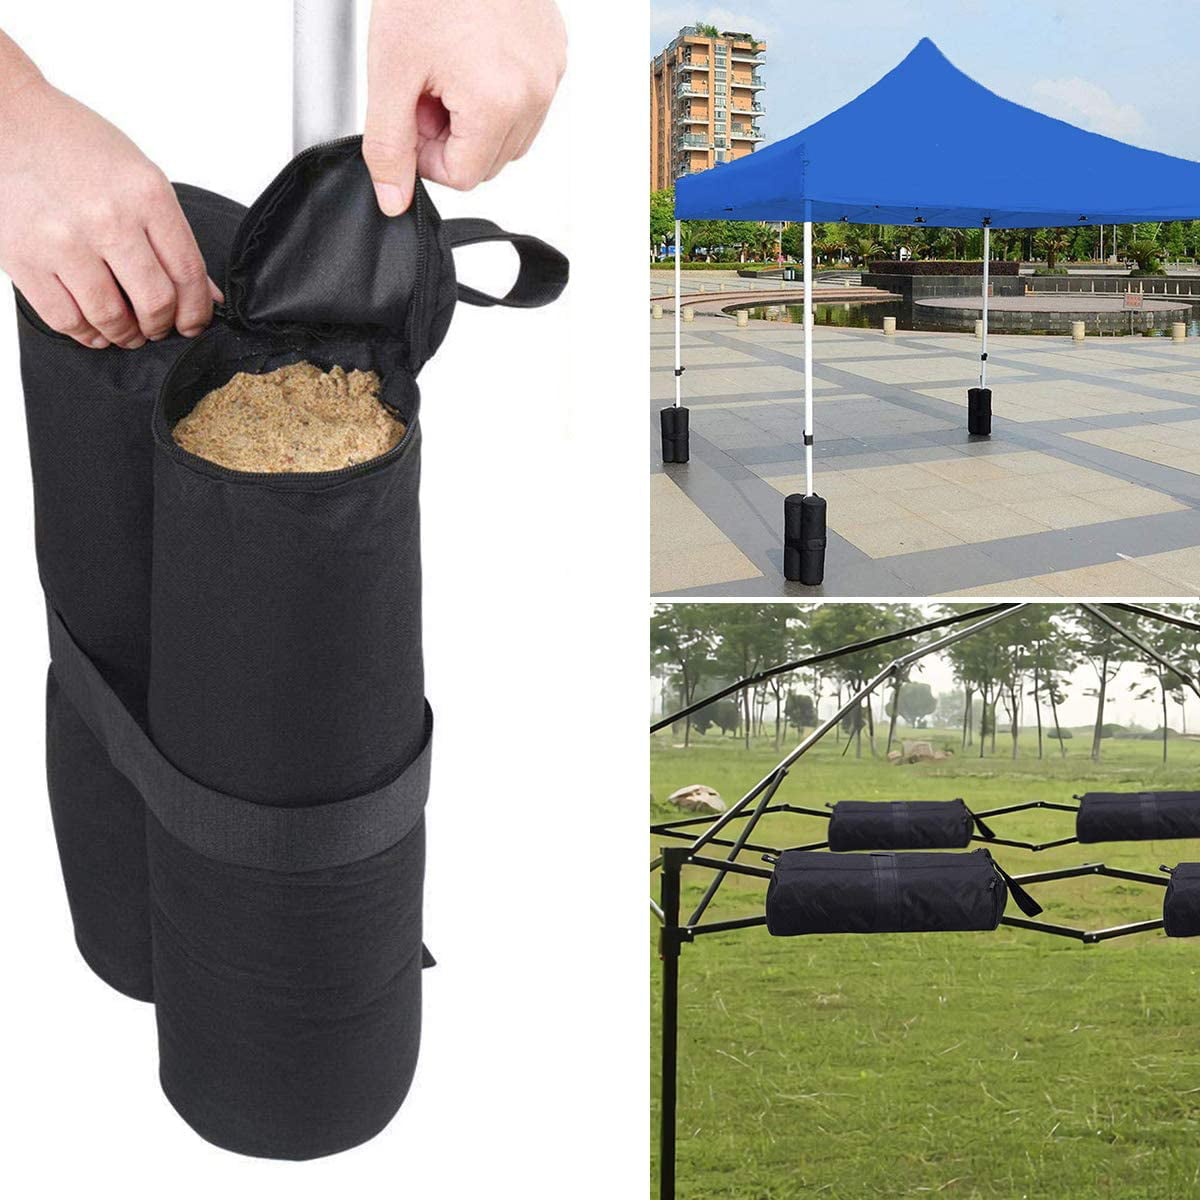 Weight Bags for Pop Up Canopy Patio Outdoor Gazebo Umbrella Sun Shelter Black Heavy Duty Canopy Weights Set of 4 Weights for Canopy Tents 